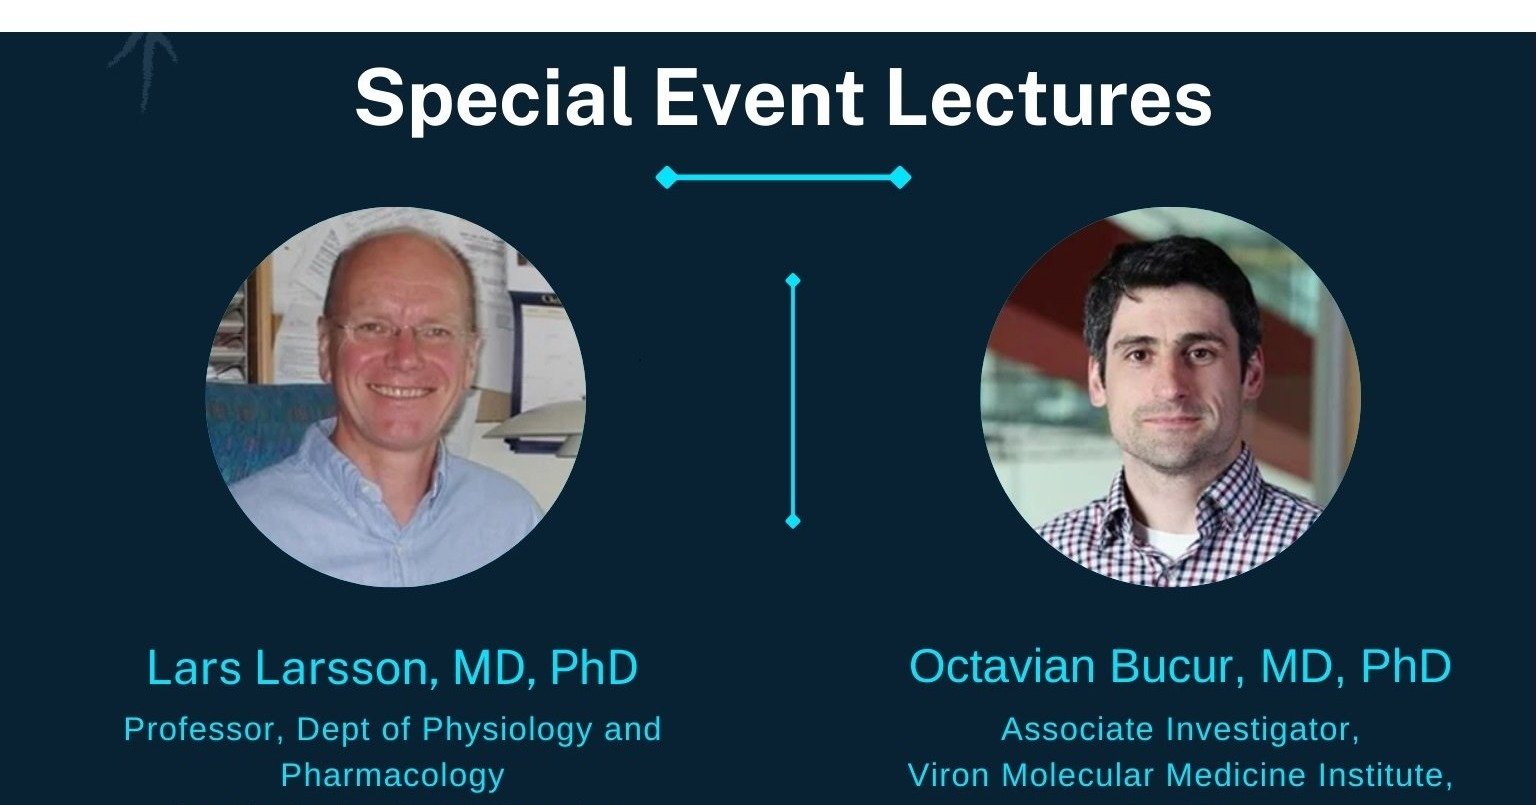 Octavian presented a Special Event Lecture at the BIDMC, Harvard University teaching hospital in Boston